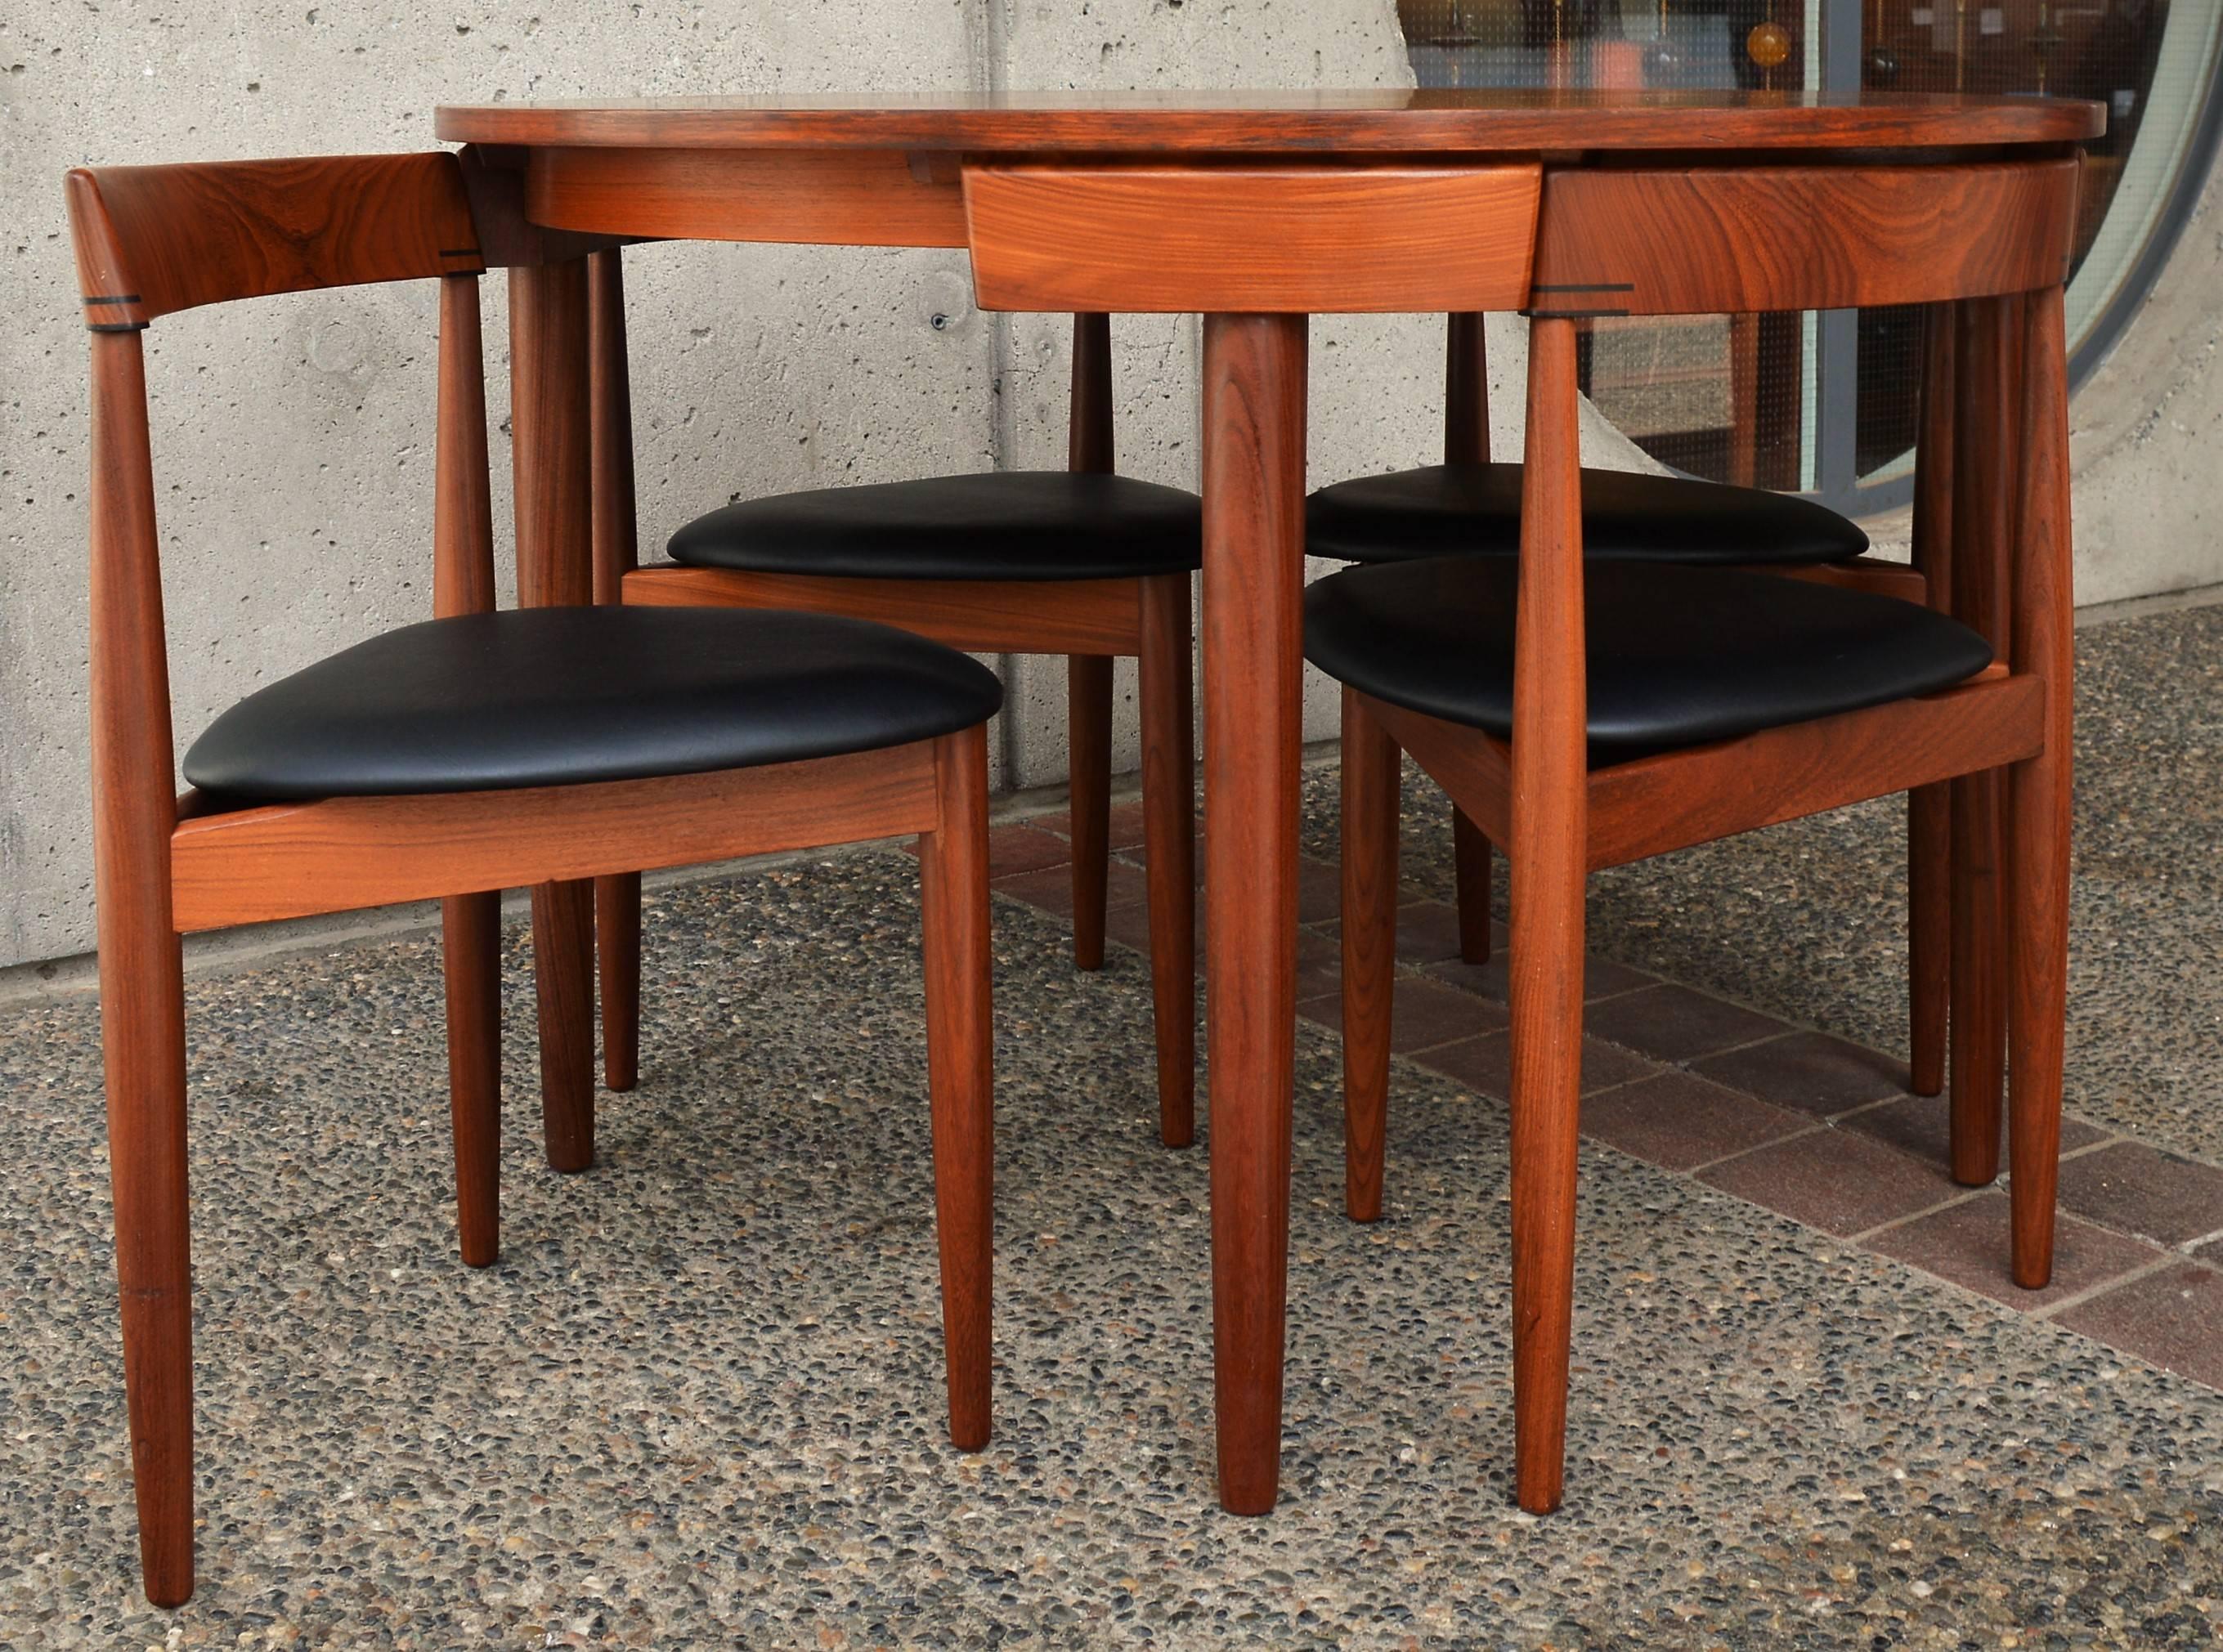 Mid-20th Century Compact Hans Olsen Teak Dining Set with Four Dining Chairs for Frem Rojle